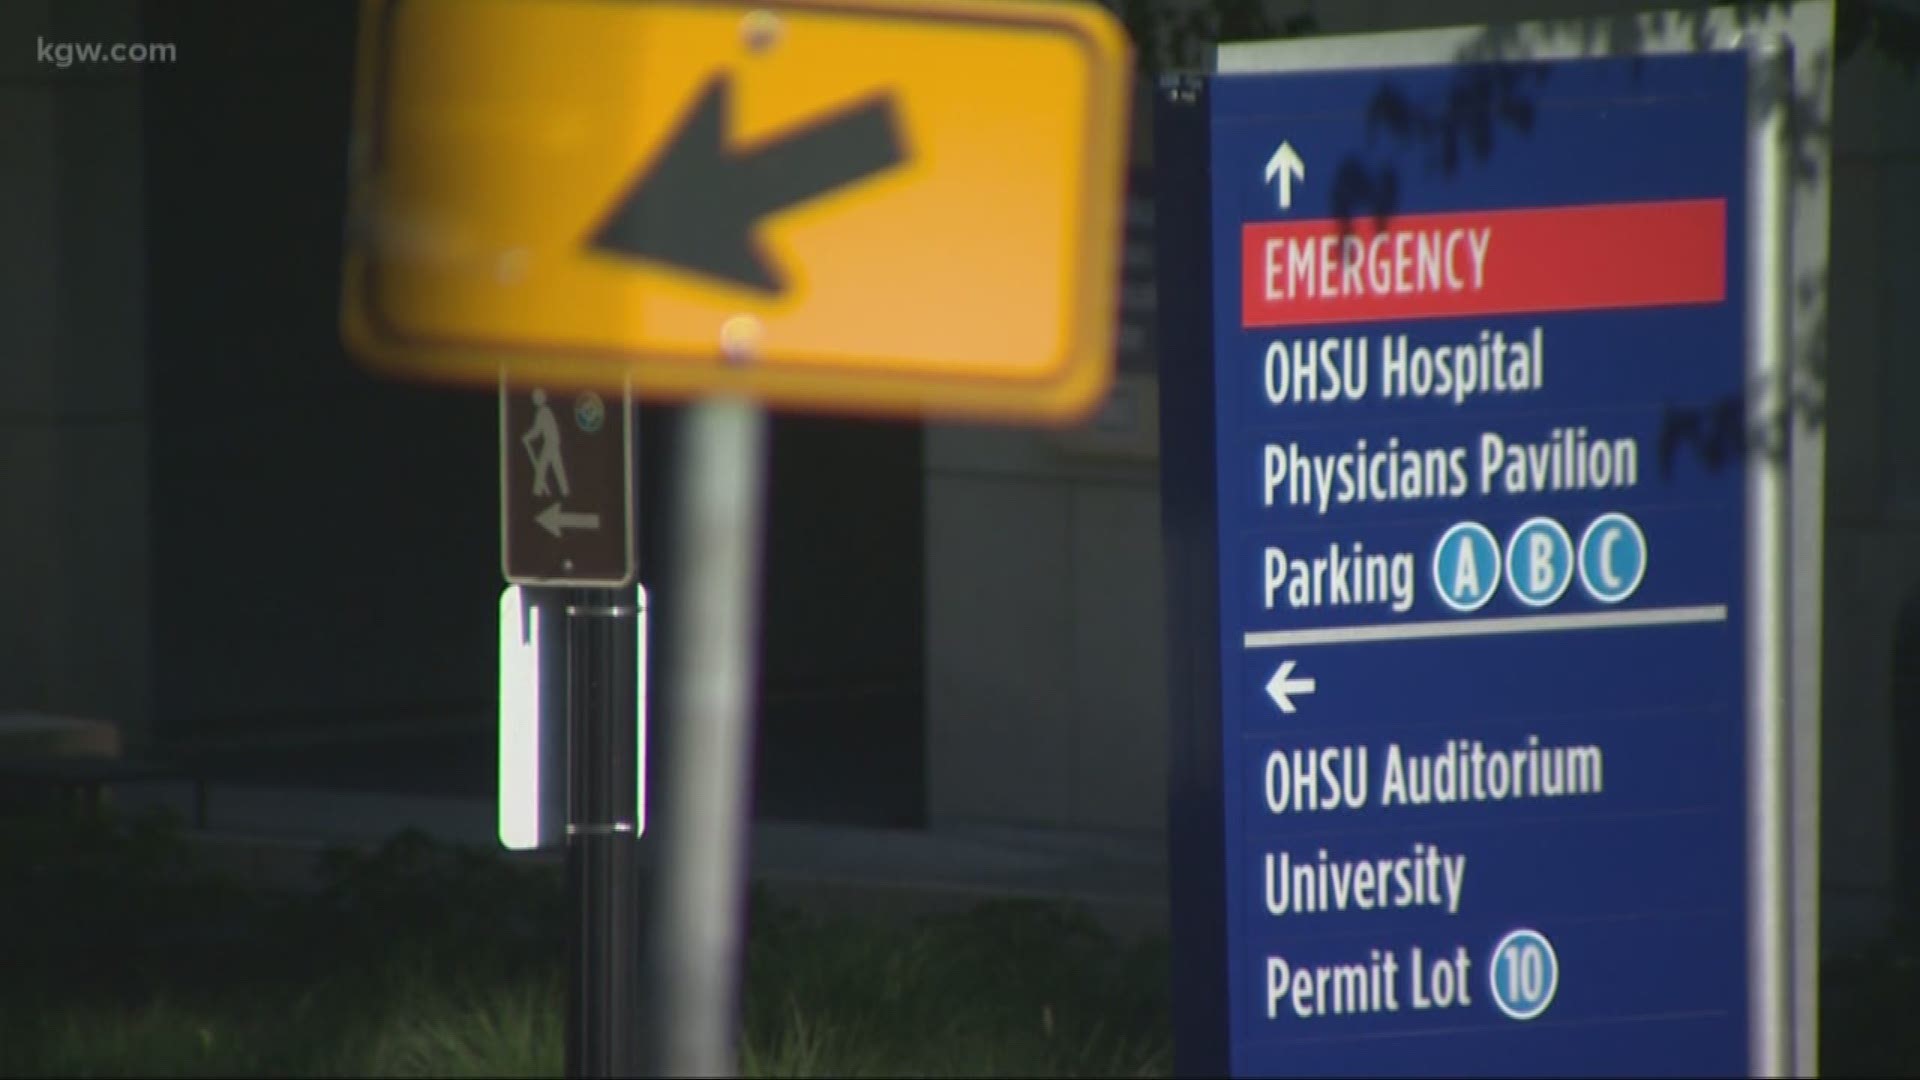 The president at OHSU wants to know what's going on with the heart transplant program after four cardiologists have quit.